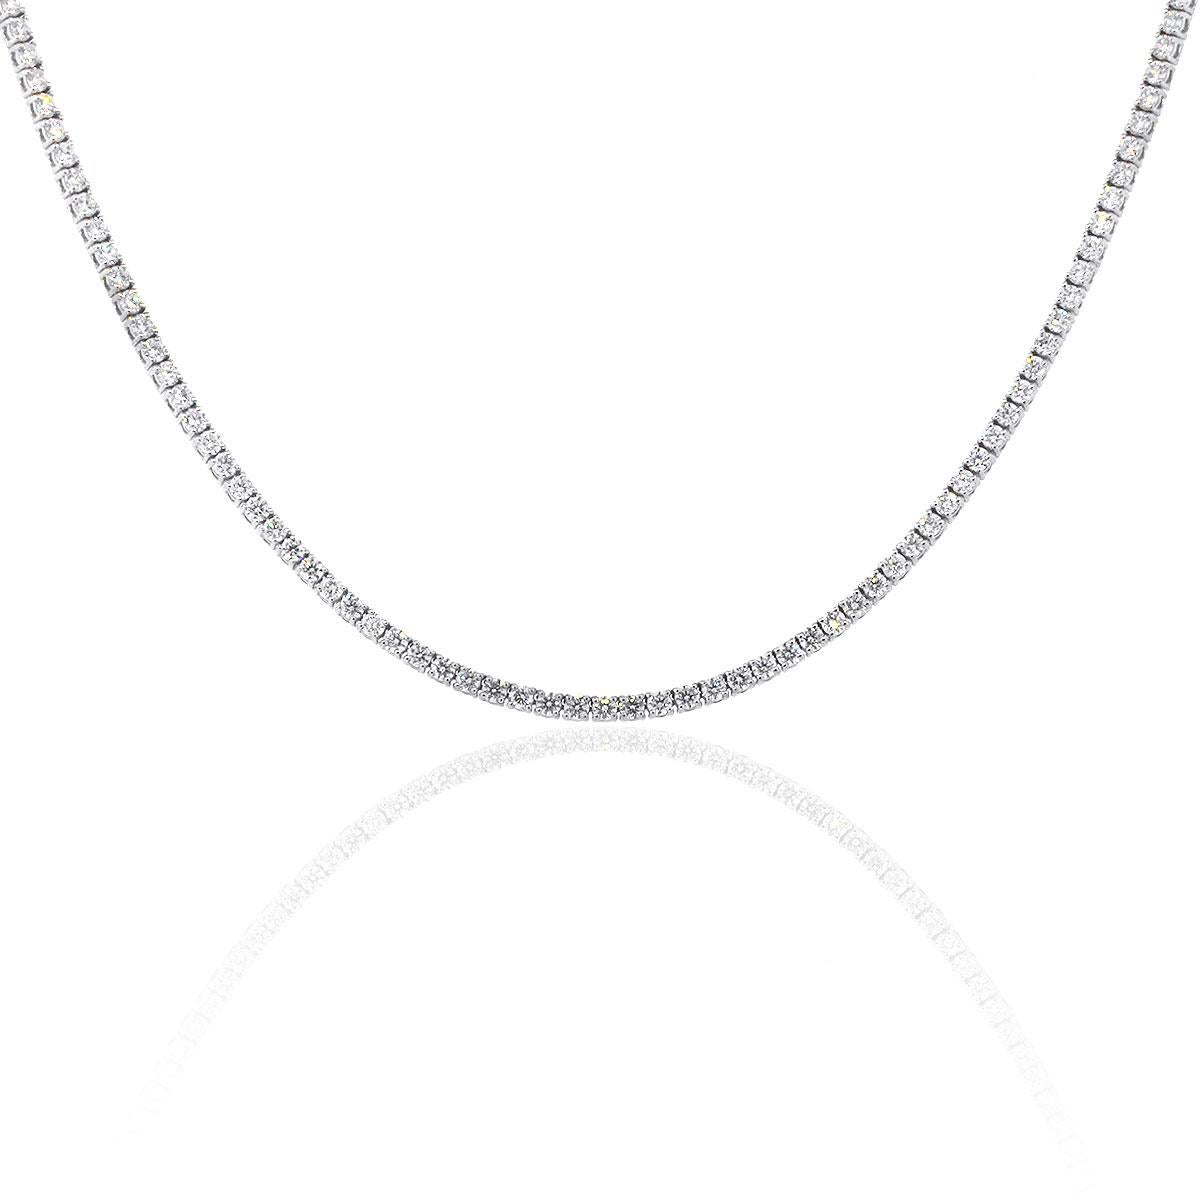 Material: 18k White Gold
Diamond Details: Approximately 9.03ctw of round brilliant diamonds. Diamonds are G/H in color and VS in clarity.
Necklace Measurements: 18″
Clasp: Tongue in Box with safety clasp
Total Weight: 21g (13.4dwt)
SKU: A30311884